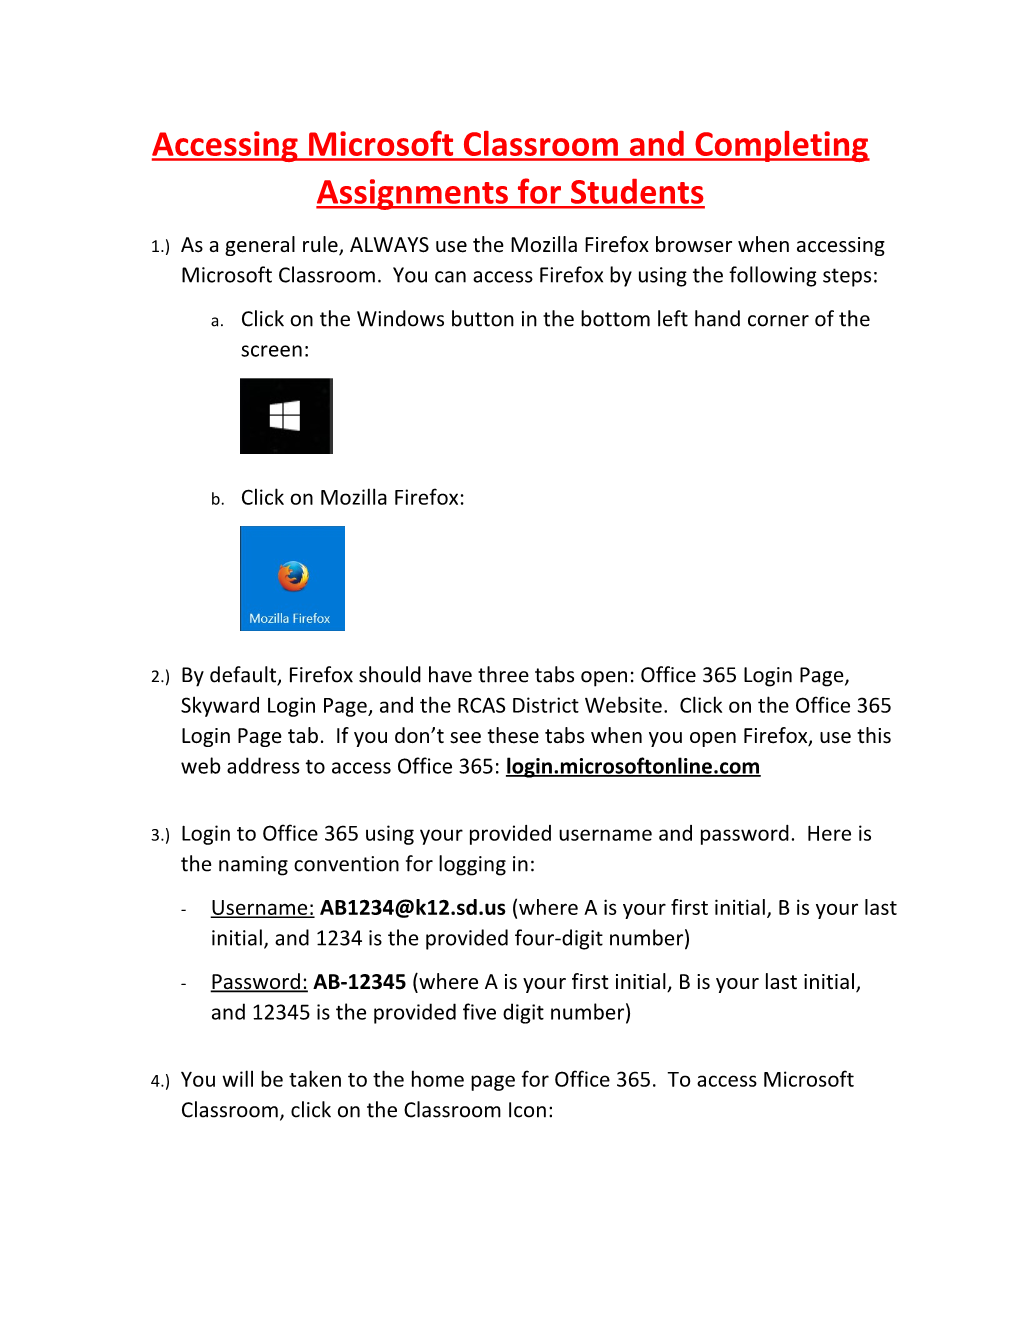 Accessing Microsoft Classroom and Completing Assignments for Students